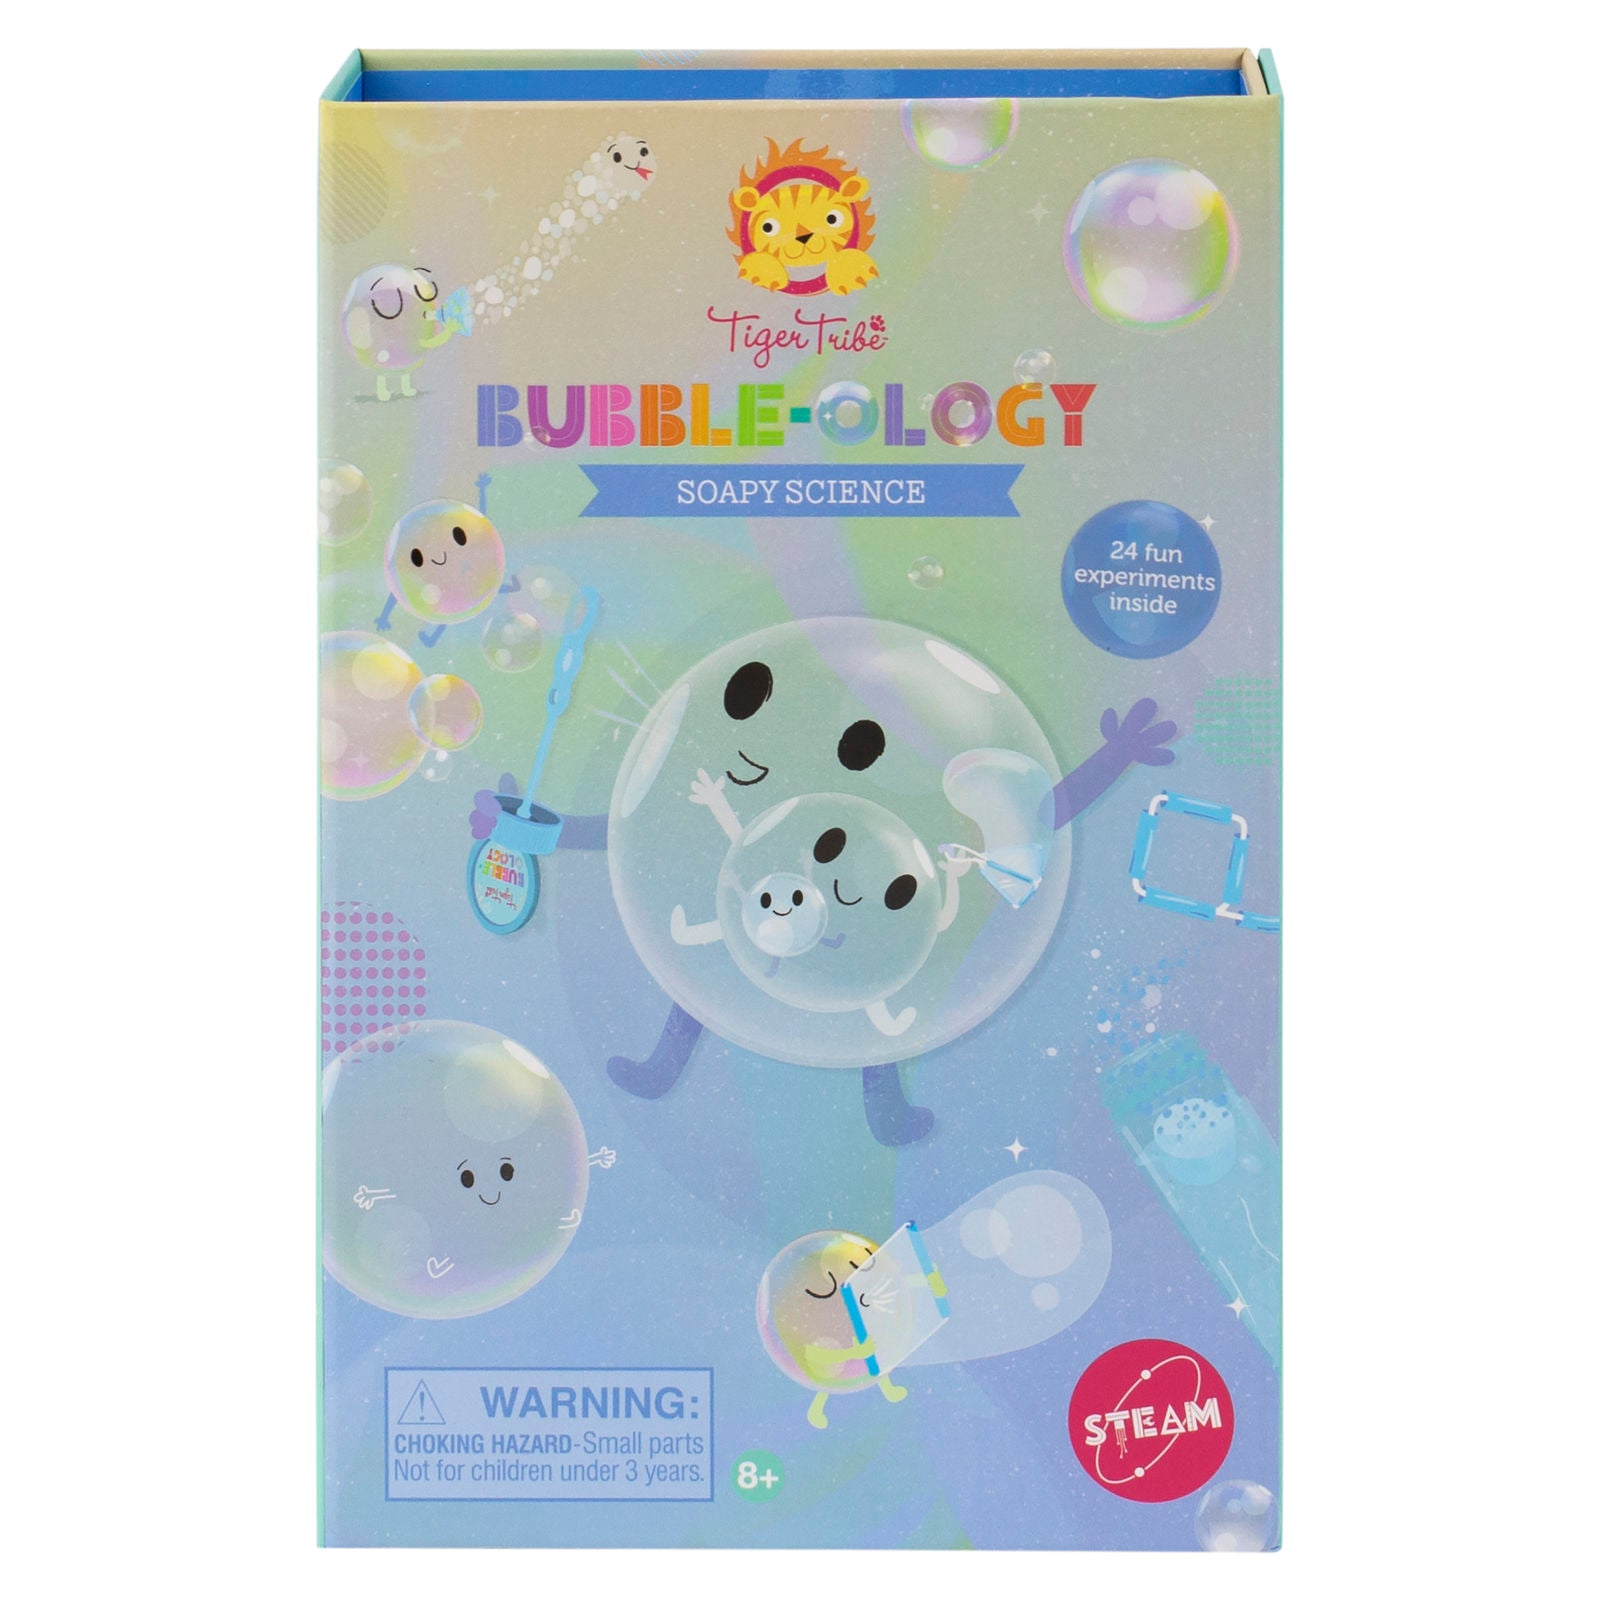 Tiger Tribe Soapy Science – Bubble-ology